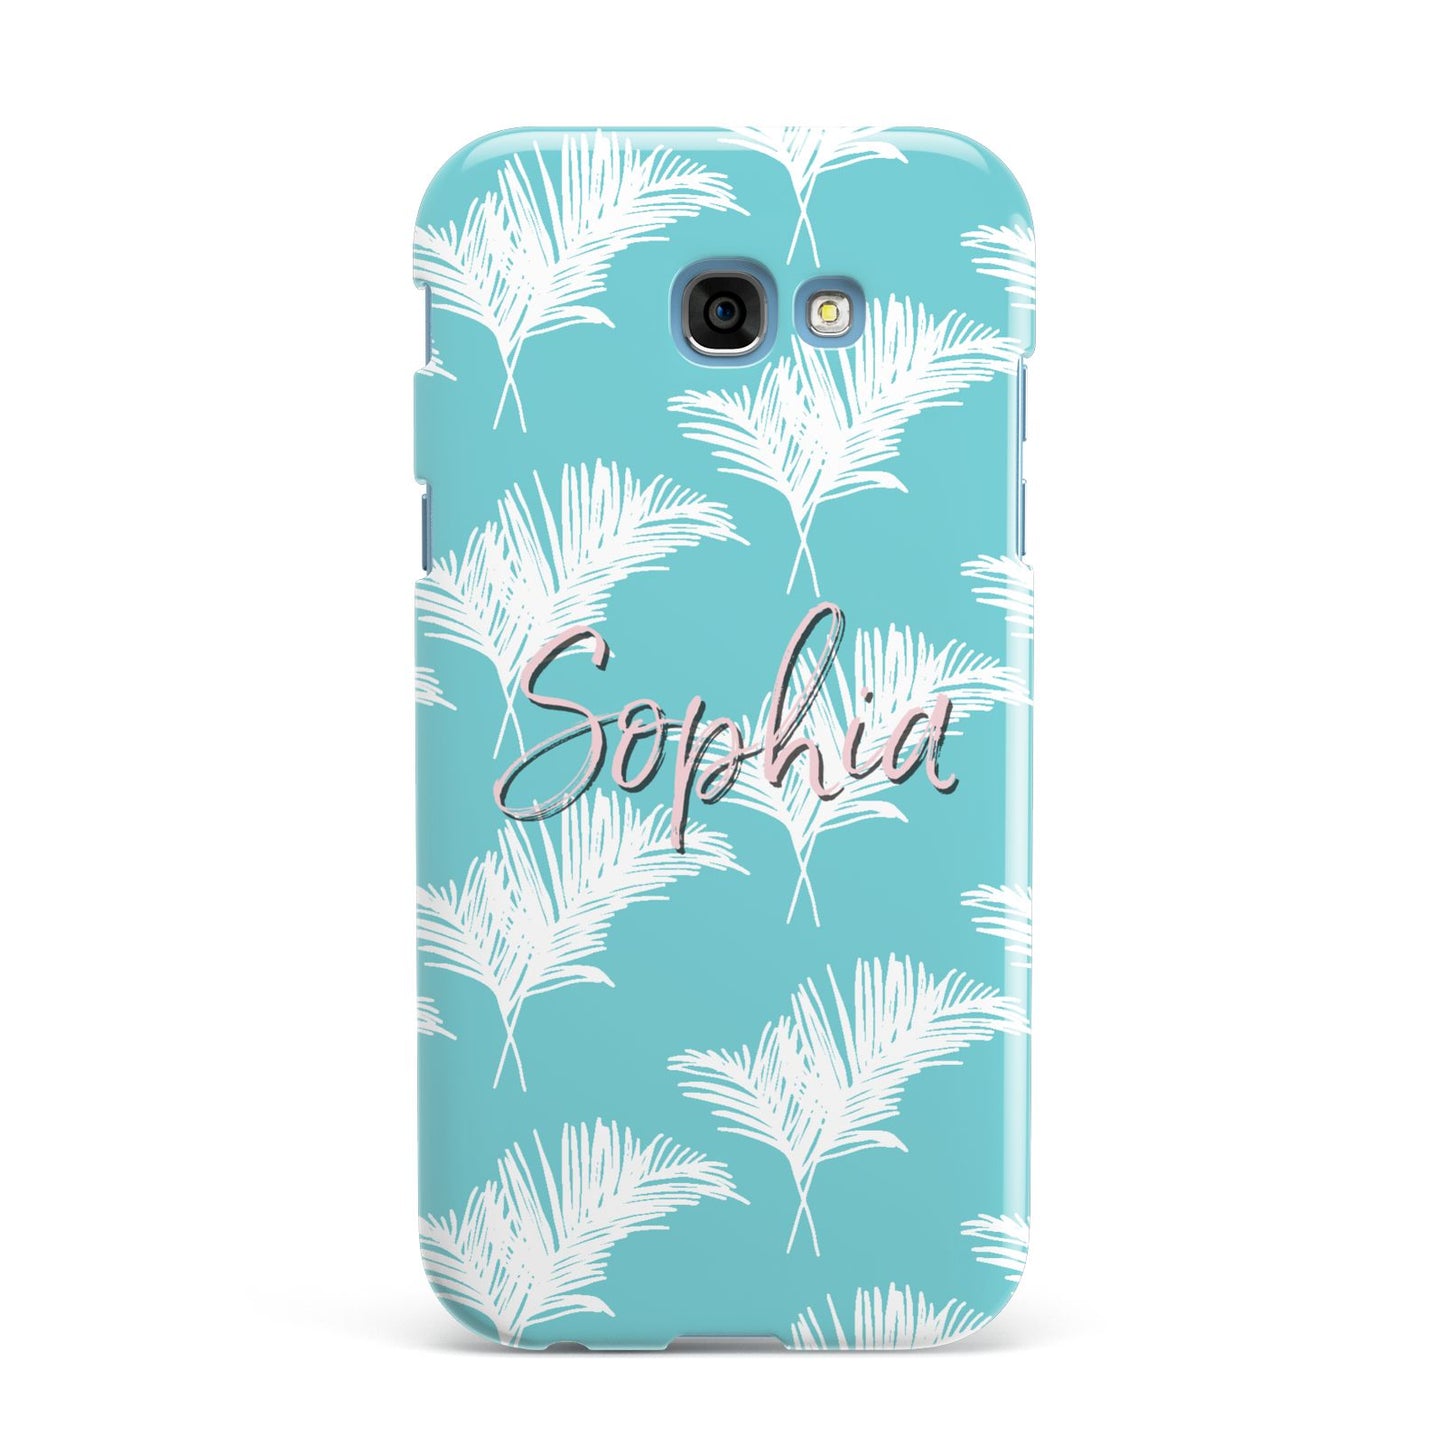 Personalised Blue White Tropical Foliage Samsung Galaxy A7 2017 Case